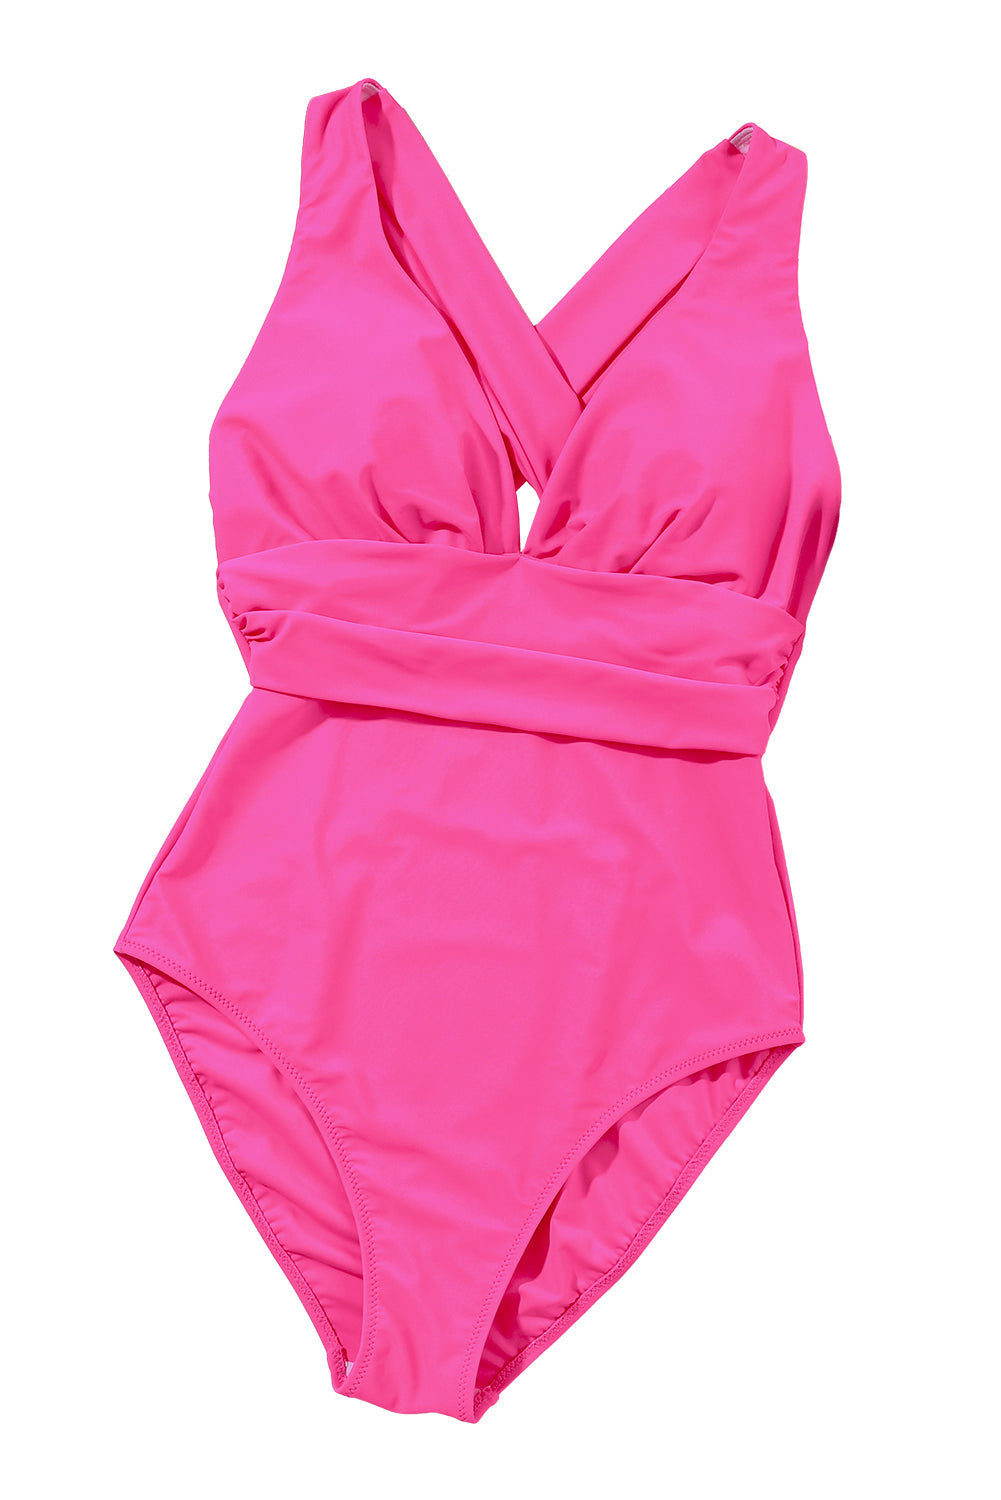 Rose Red Deep V Neck Crossover Backless Ruched High Cut Monokini